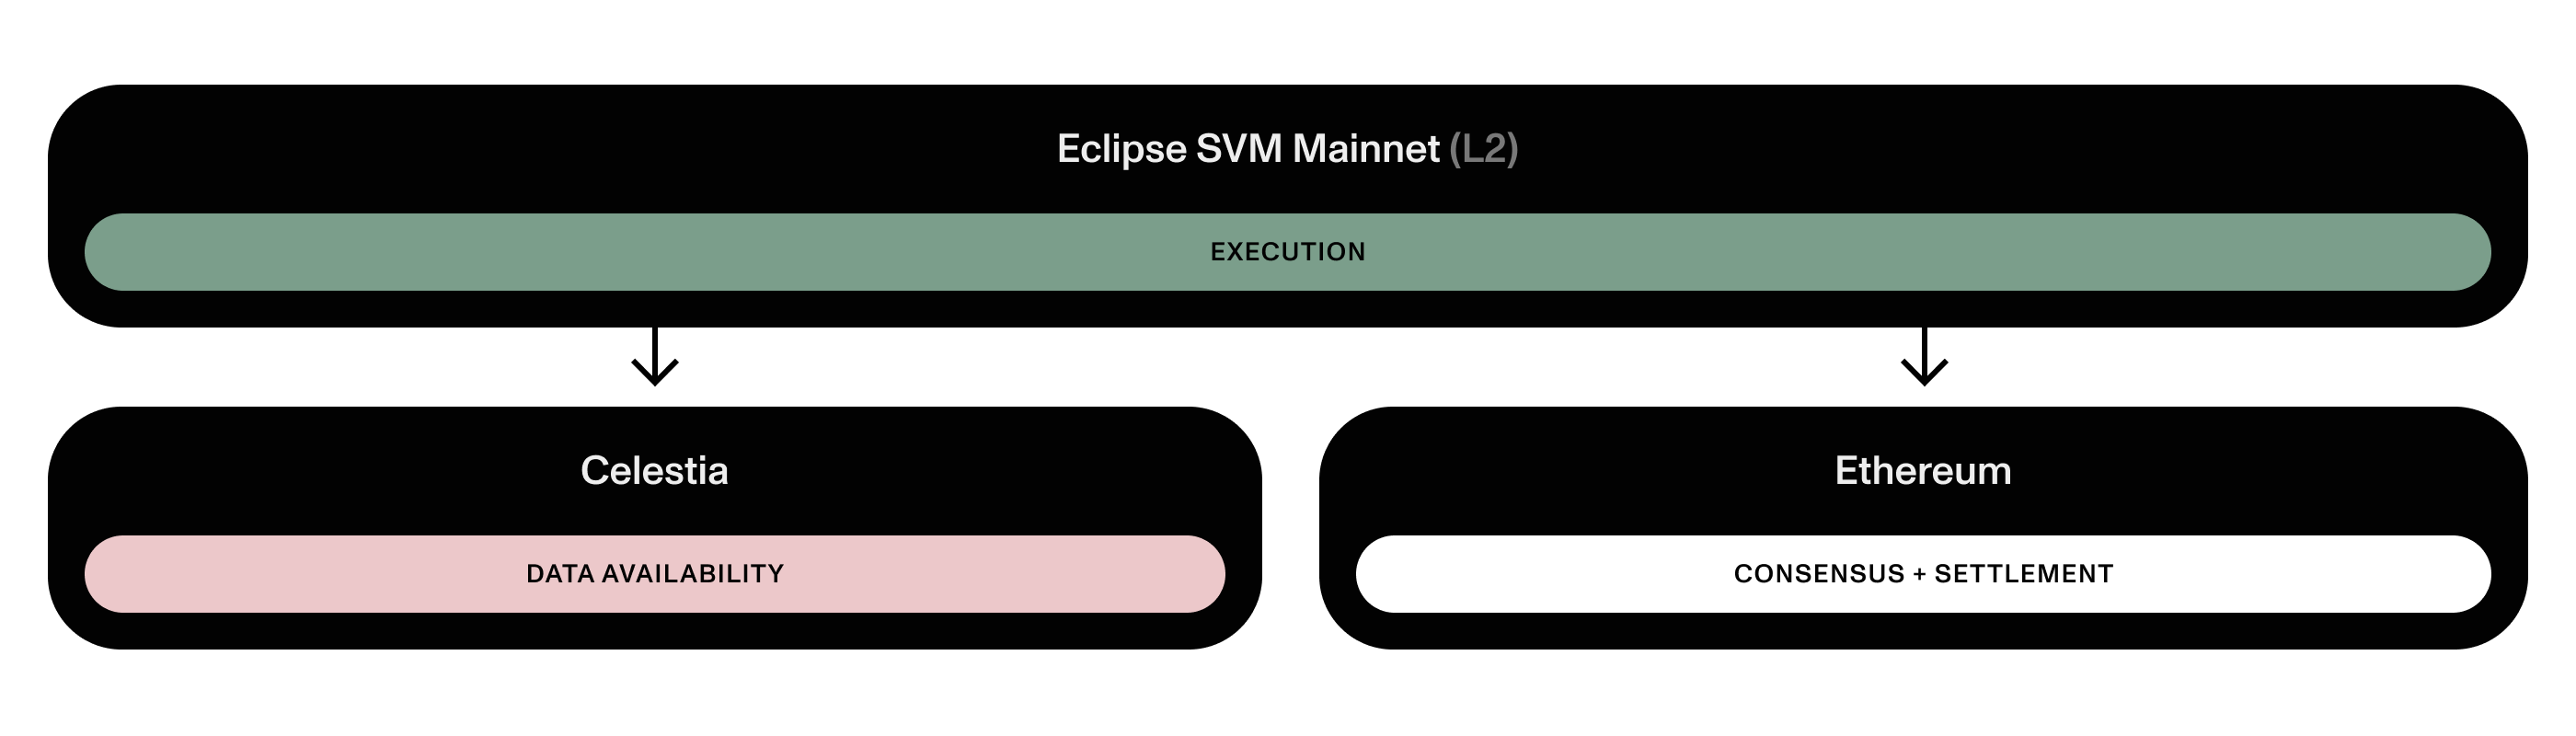 The Eclipse Modular Solution